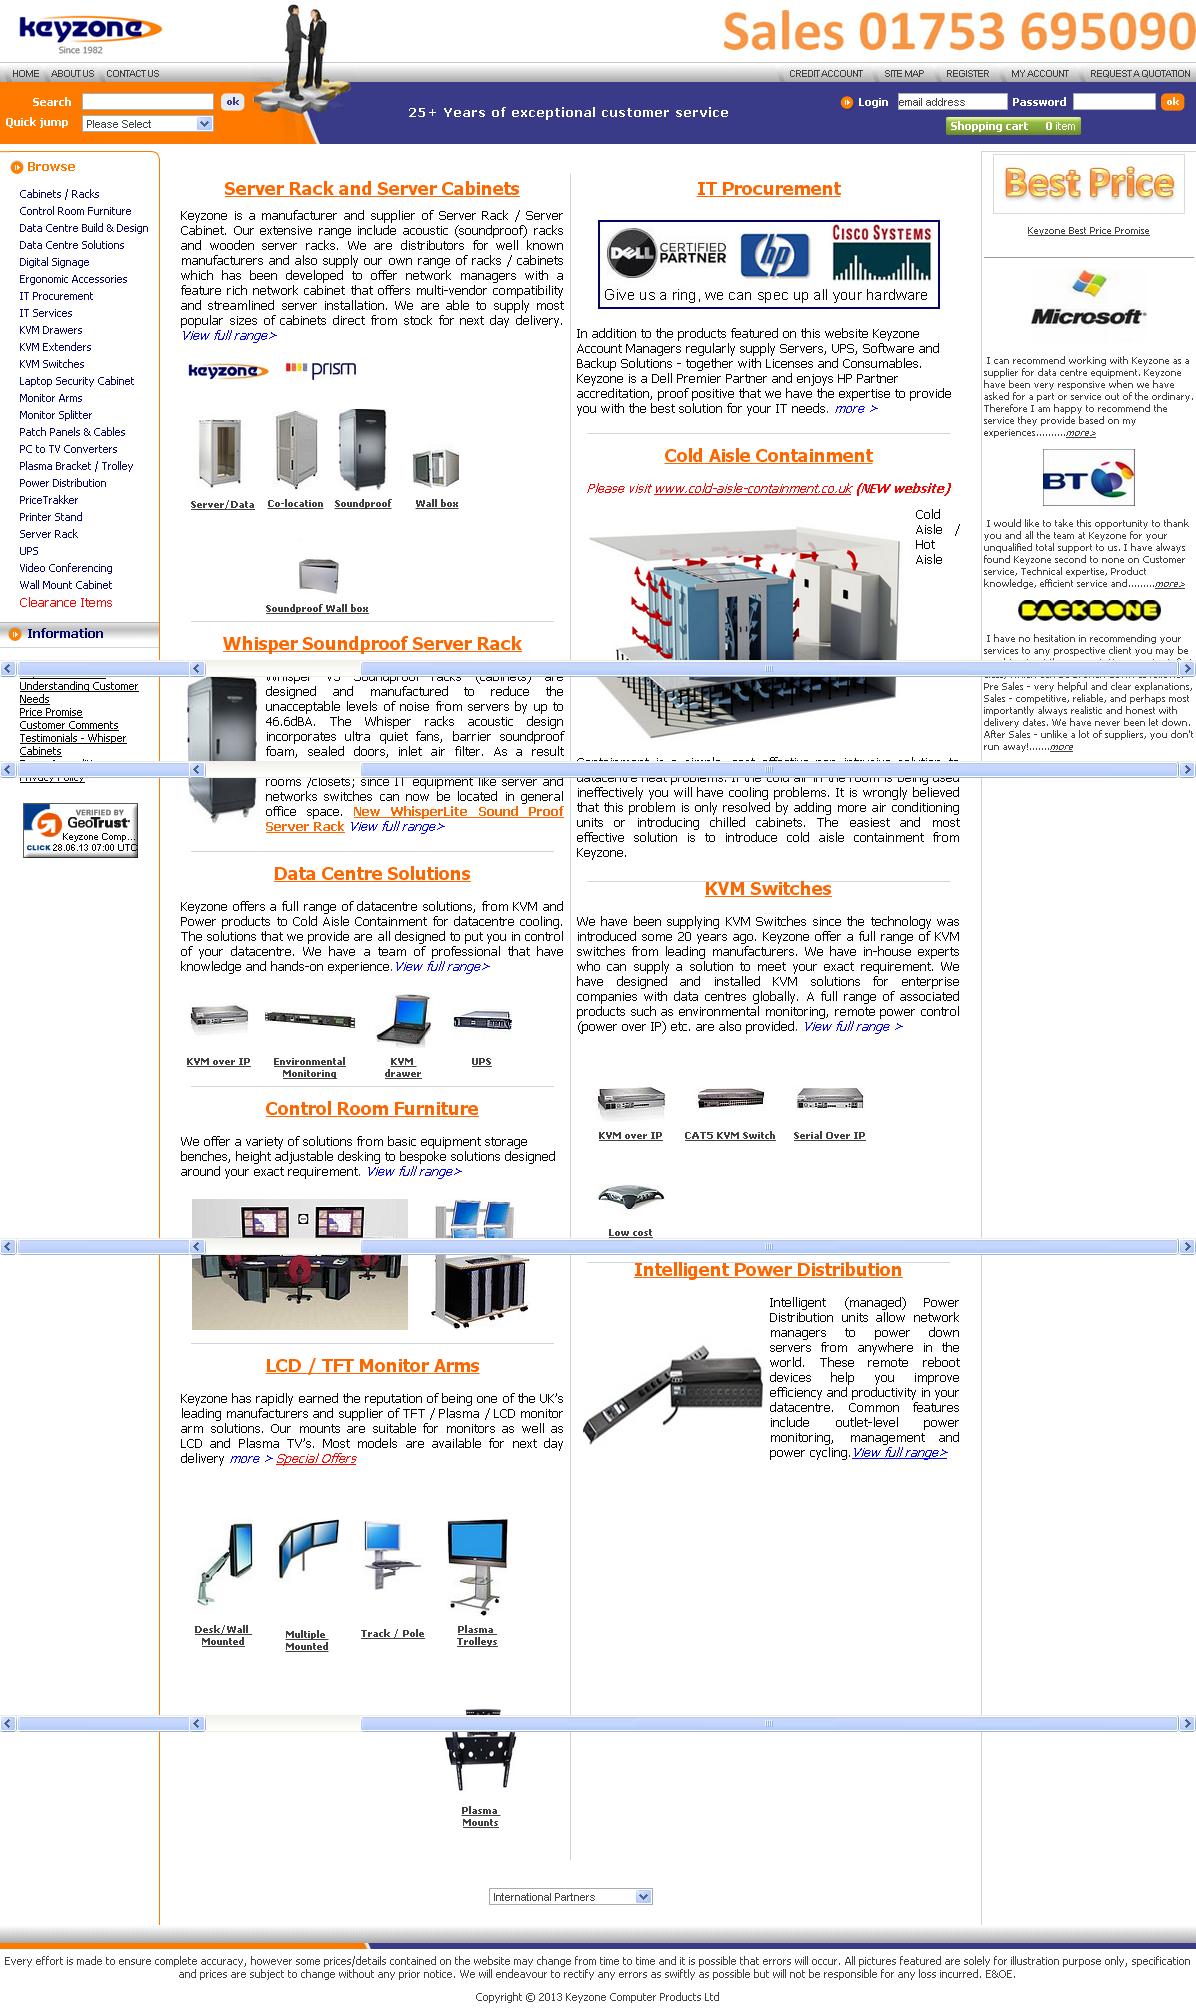 Keyzone Computer Products Limited